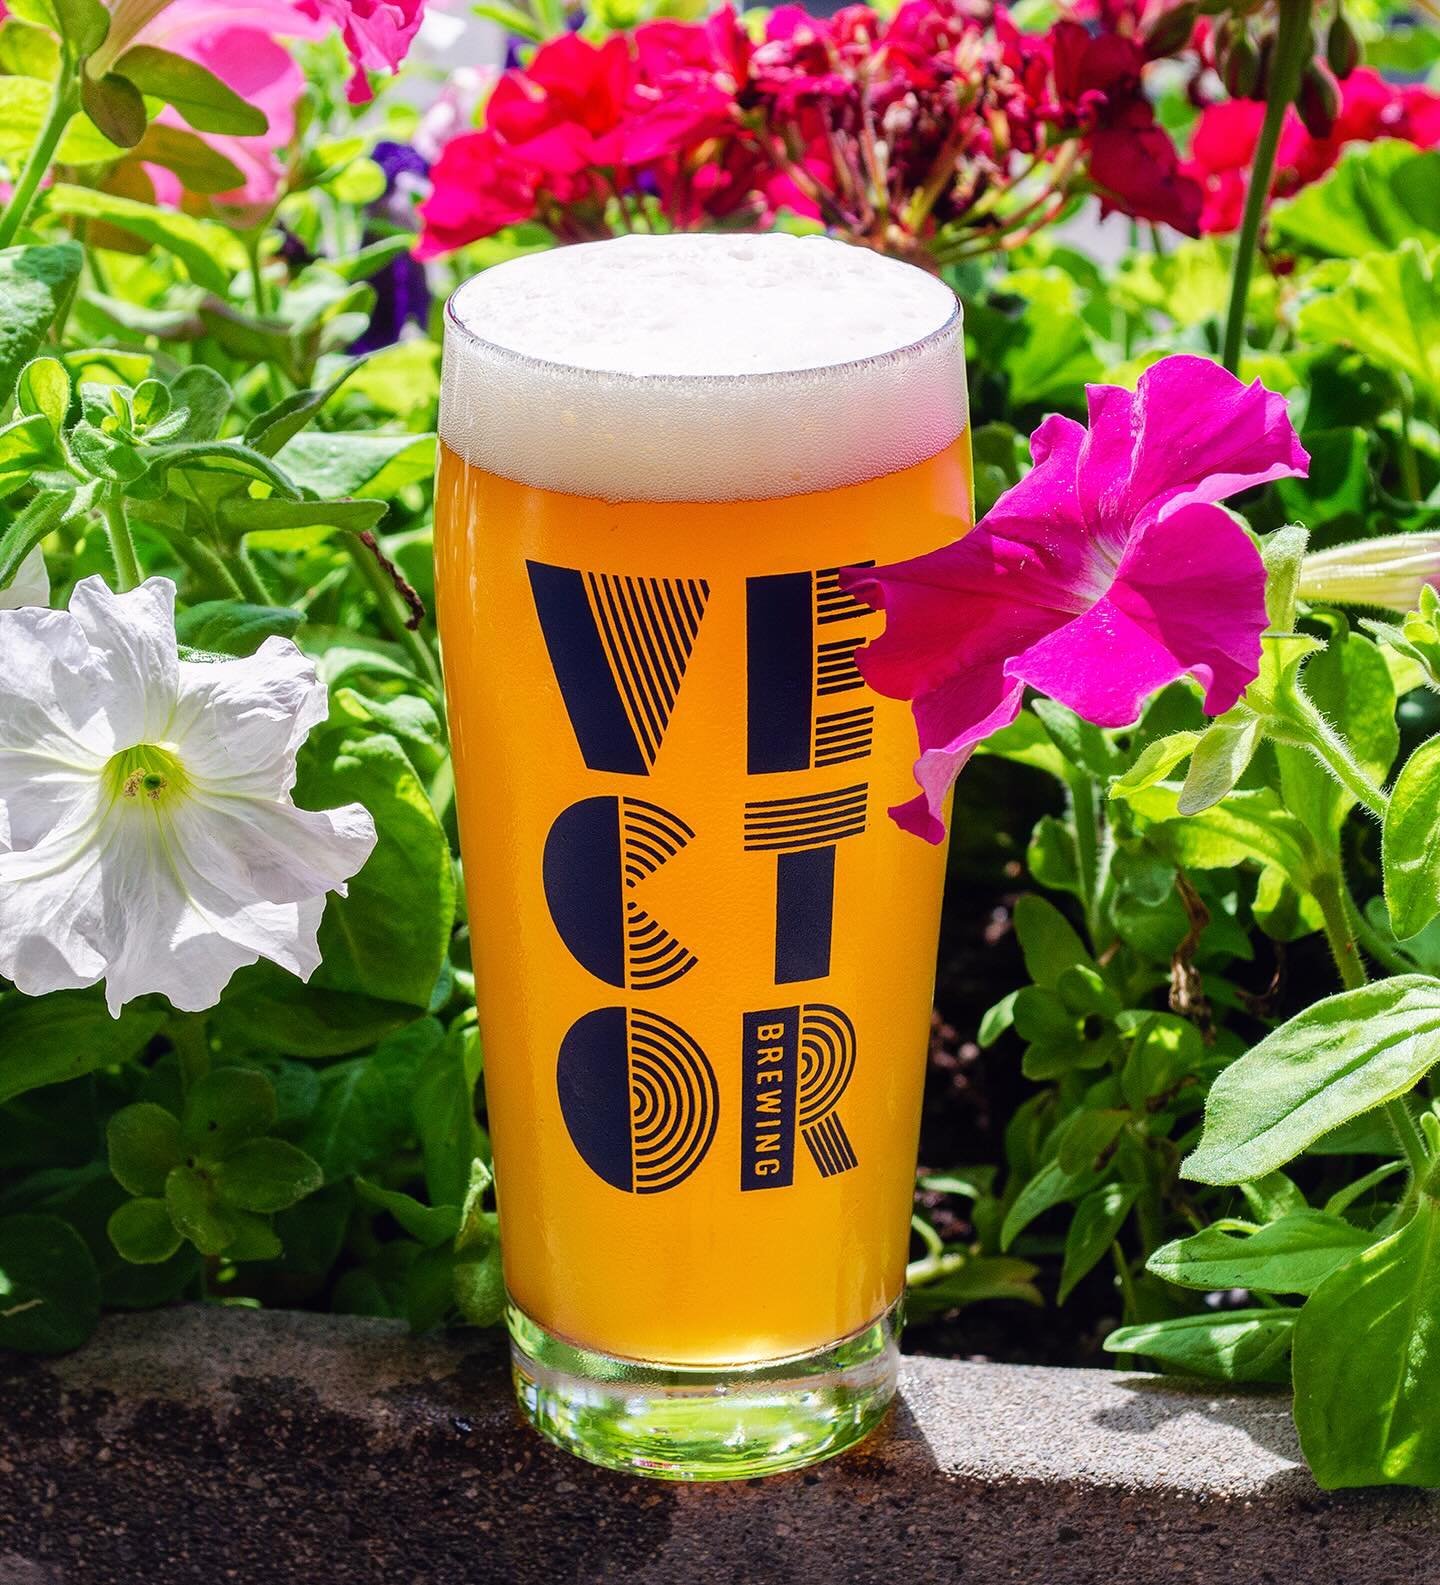 🌱𝑽𝑬𝑹𝑵𝑨𝑳🌸 German-style Maibock / 6.7% ABV

Spring has officially sprung around here, and we&rsquo;ve brought back an oldie we haven&rsquo;t brewed in 3 years. Traditionally brewed for the warming days of spring, Vernal is our take on the class